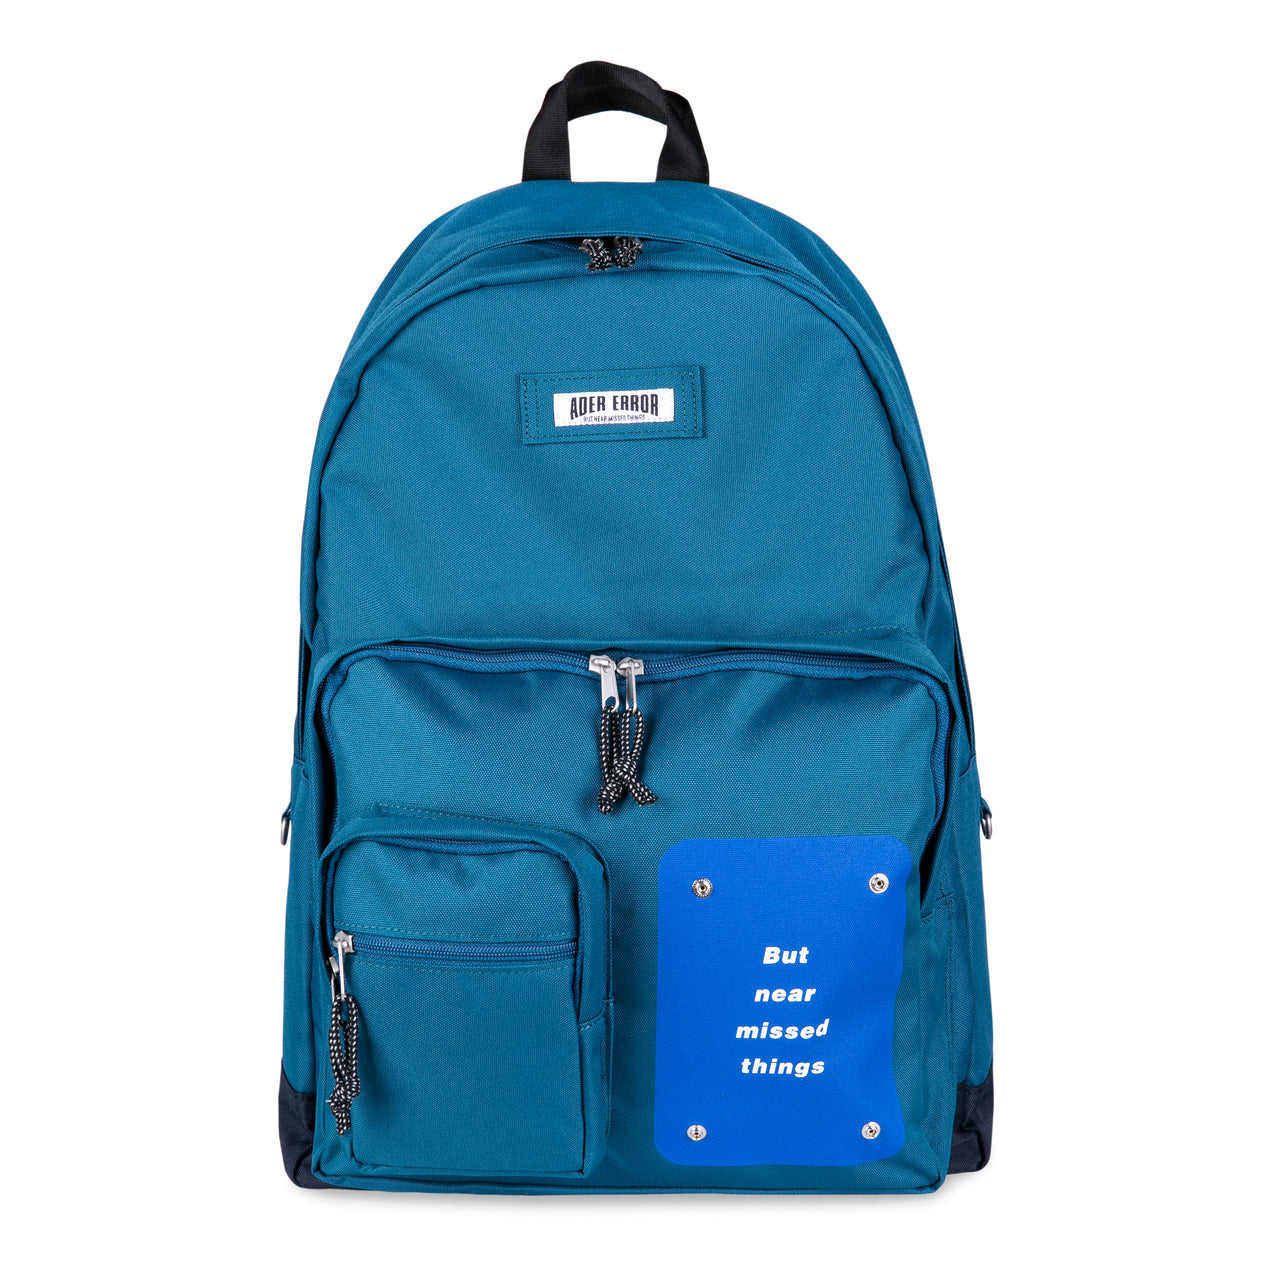 Adererror Pouch Backpack - Turquoise Blue